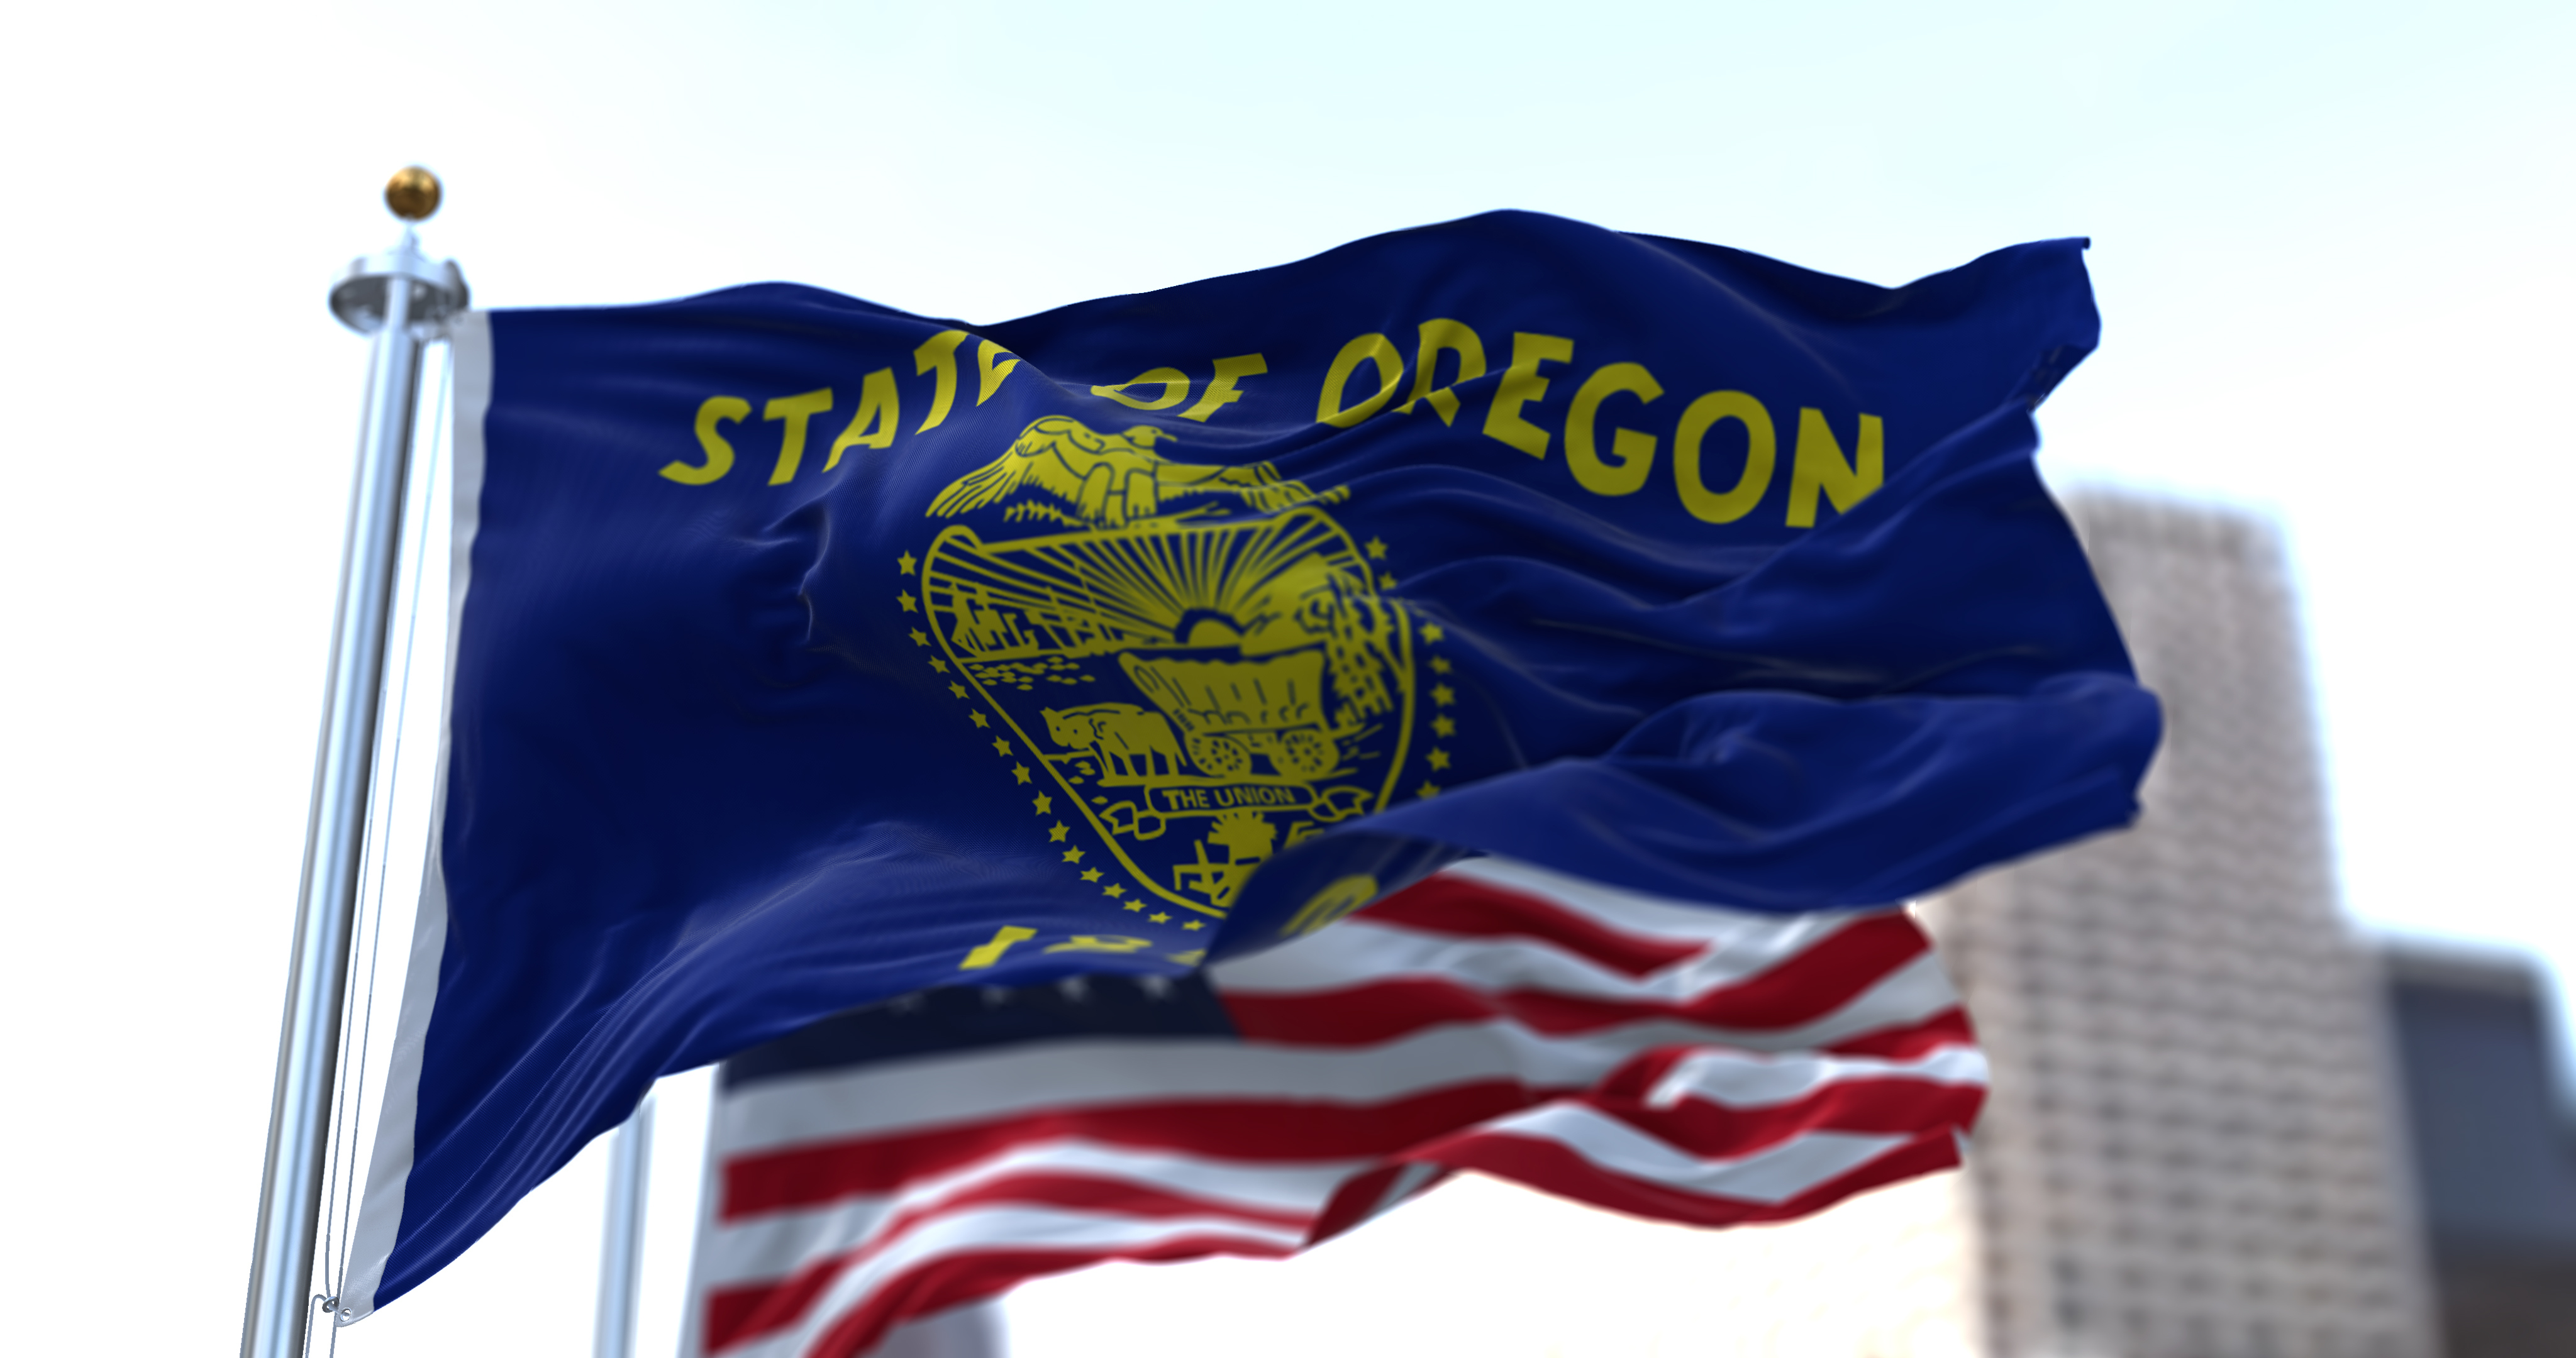 The flags of the Oregon state and United States waving in the wind